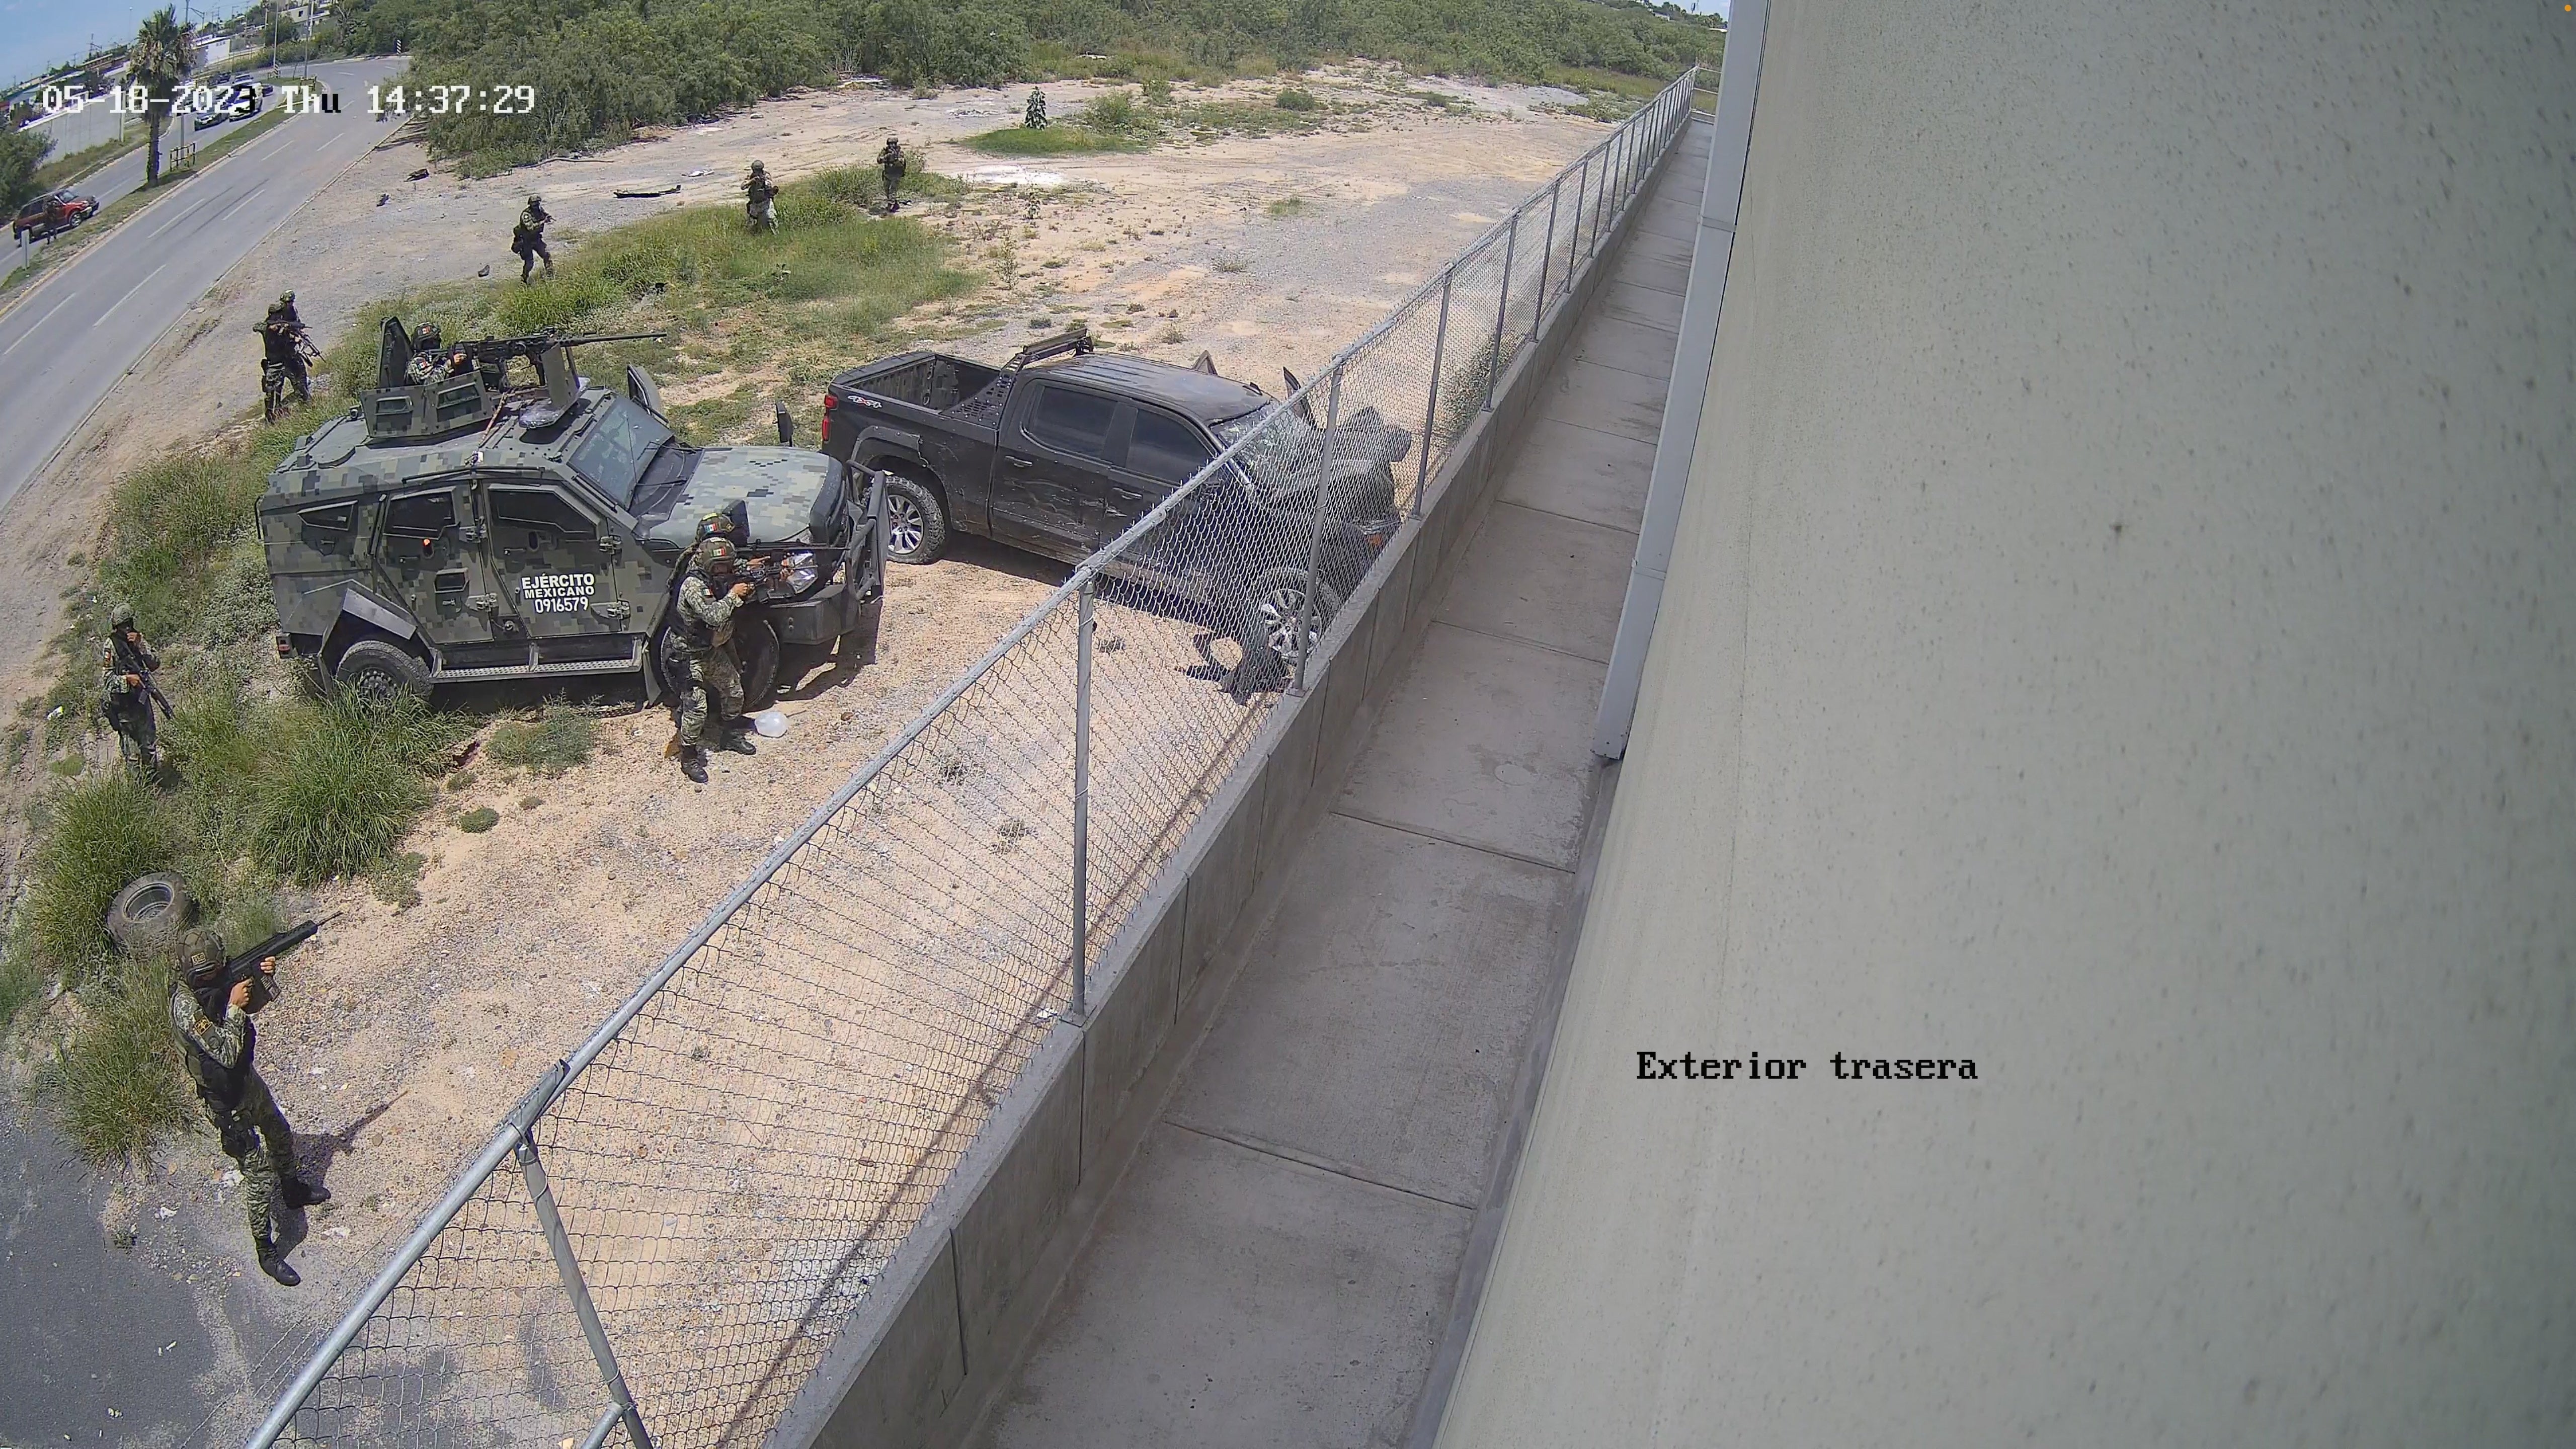 Soldiers with weapons approach a pick-up truck after it crashed into a wall at high speed in Nuevo Laredo, Tamaulipas